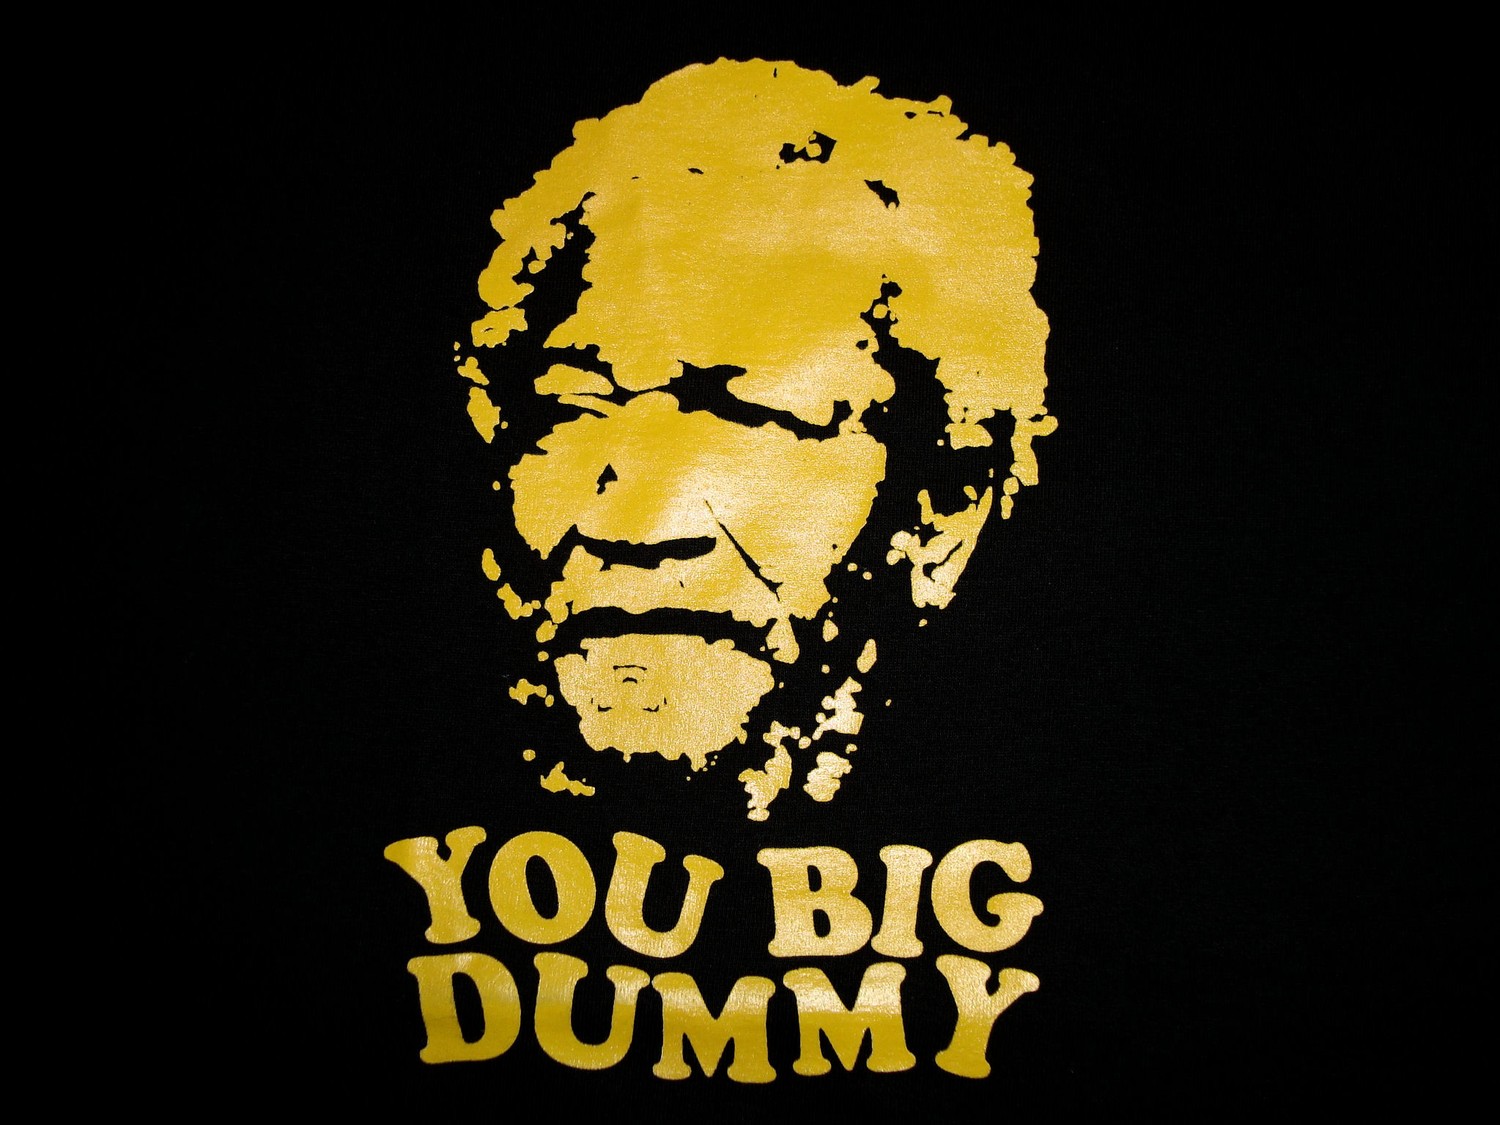 You Big Dummy Funny Sanford And Son T Shirt Available In S M L Xl For